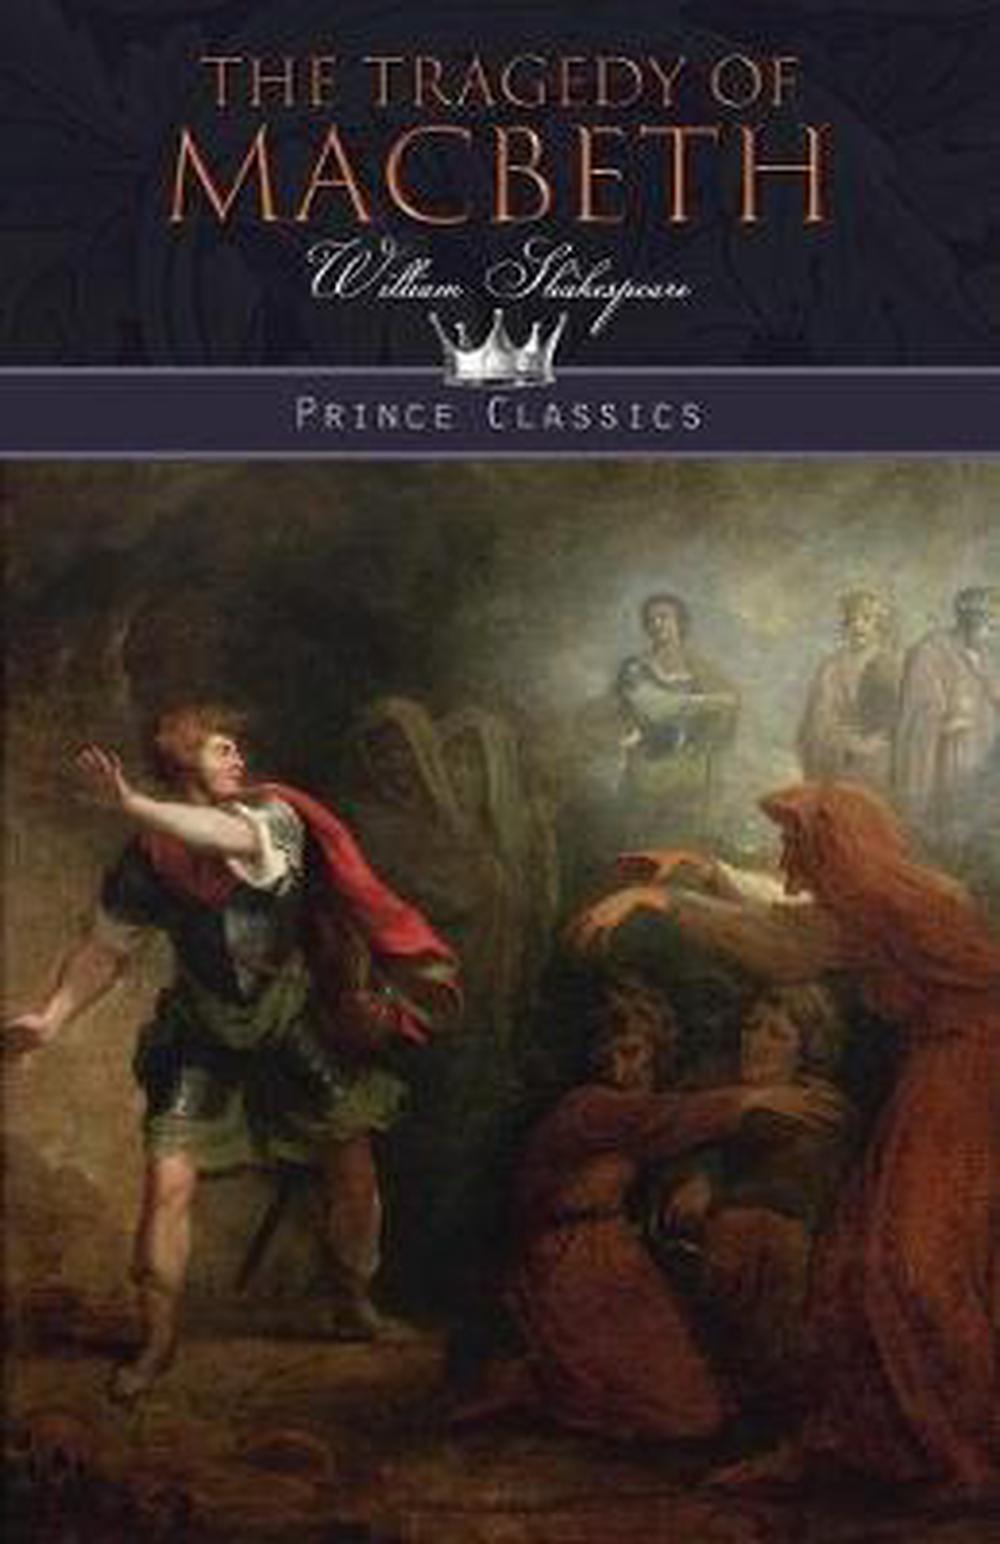 Tragedy of Macbeth by William Shakespeare (English) Paperback Book Free